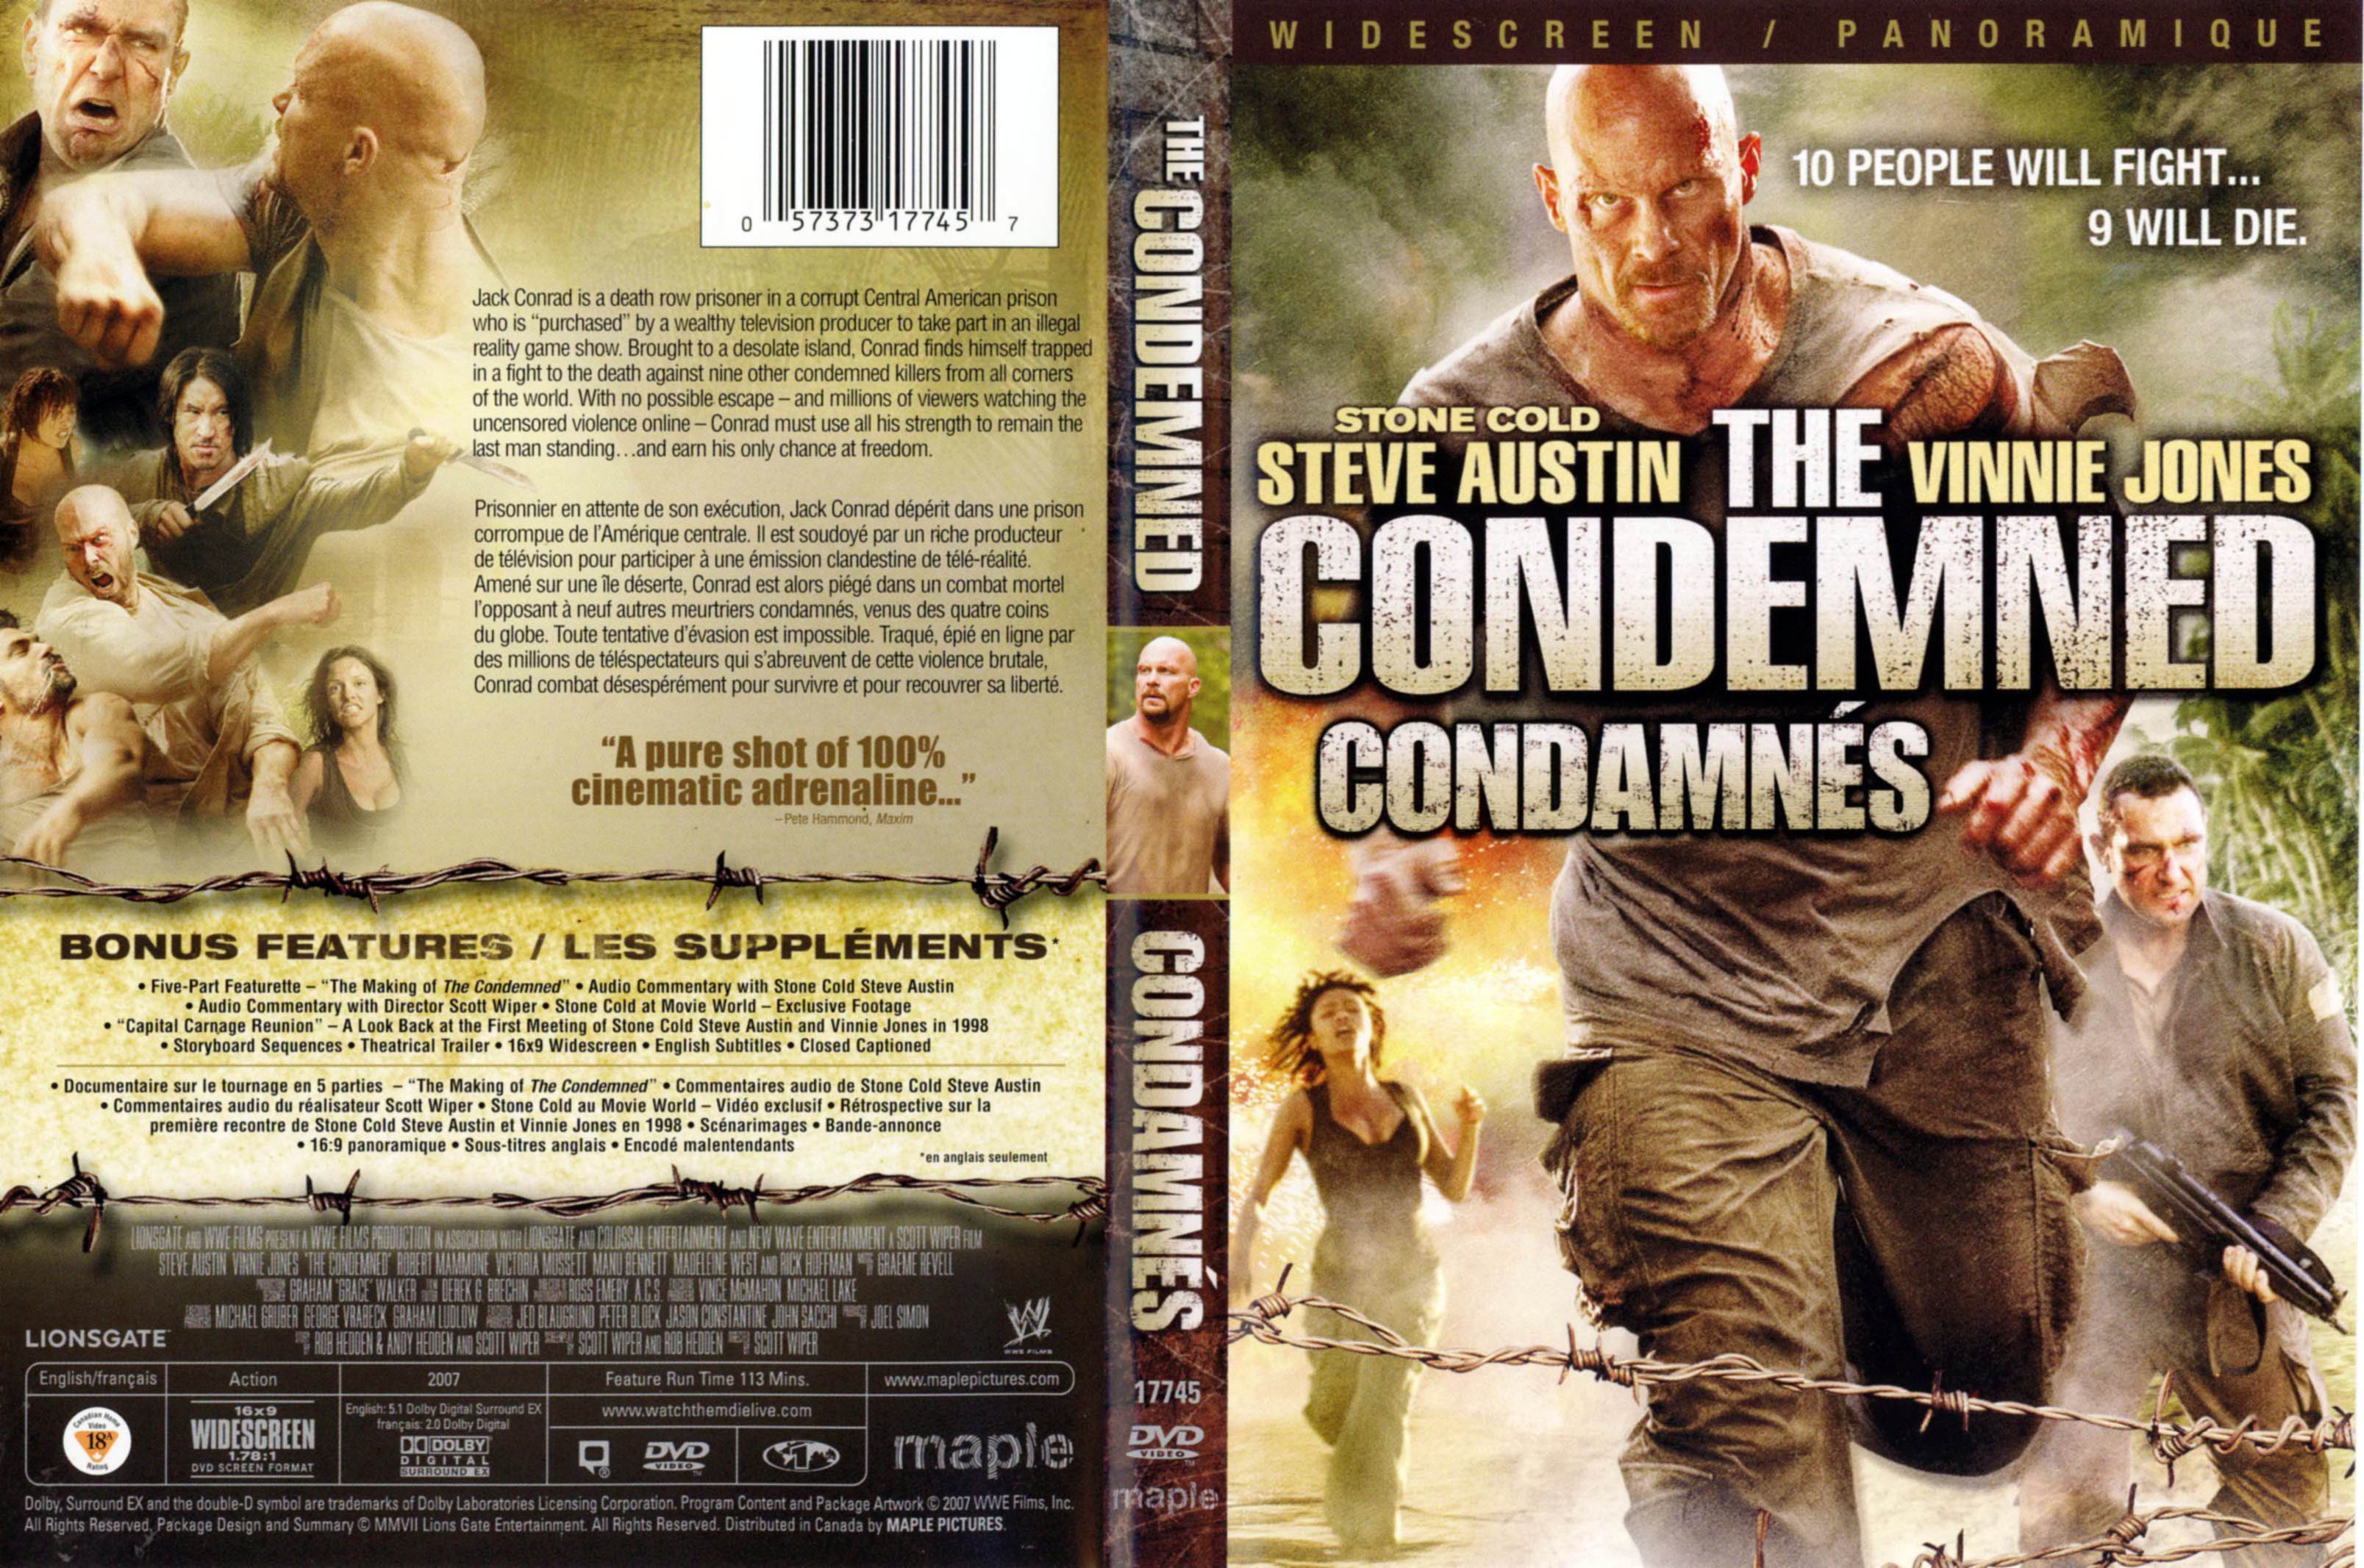 Jaquette DVD The condemned - Condamns